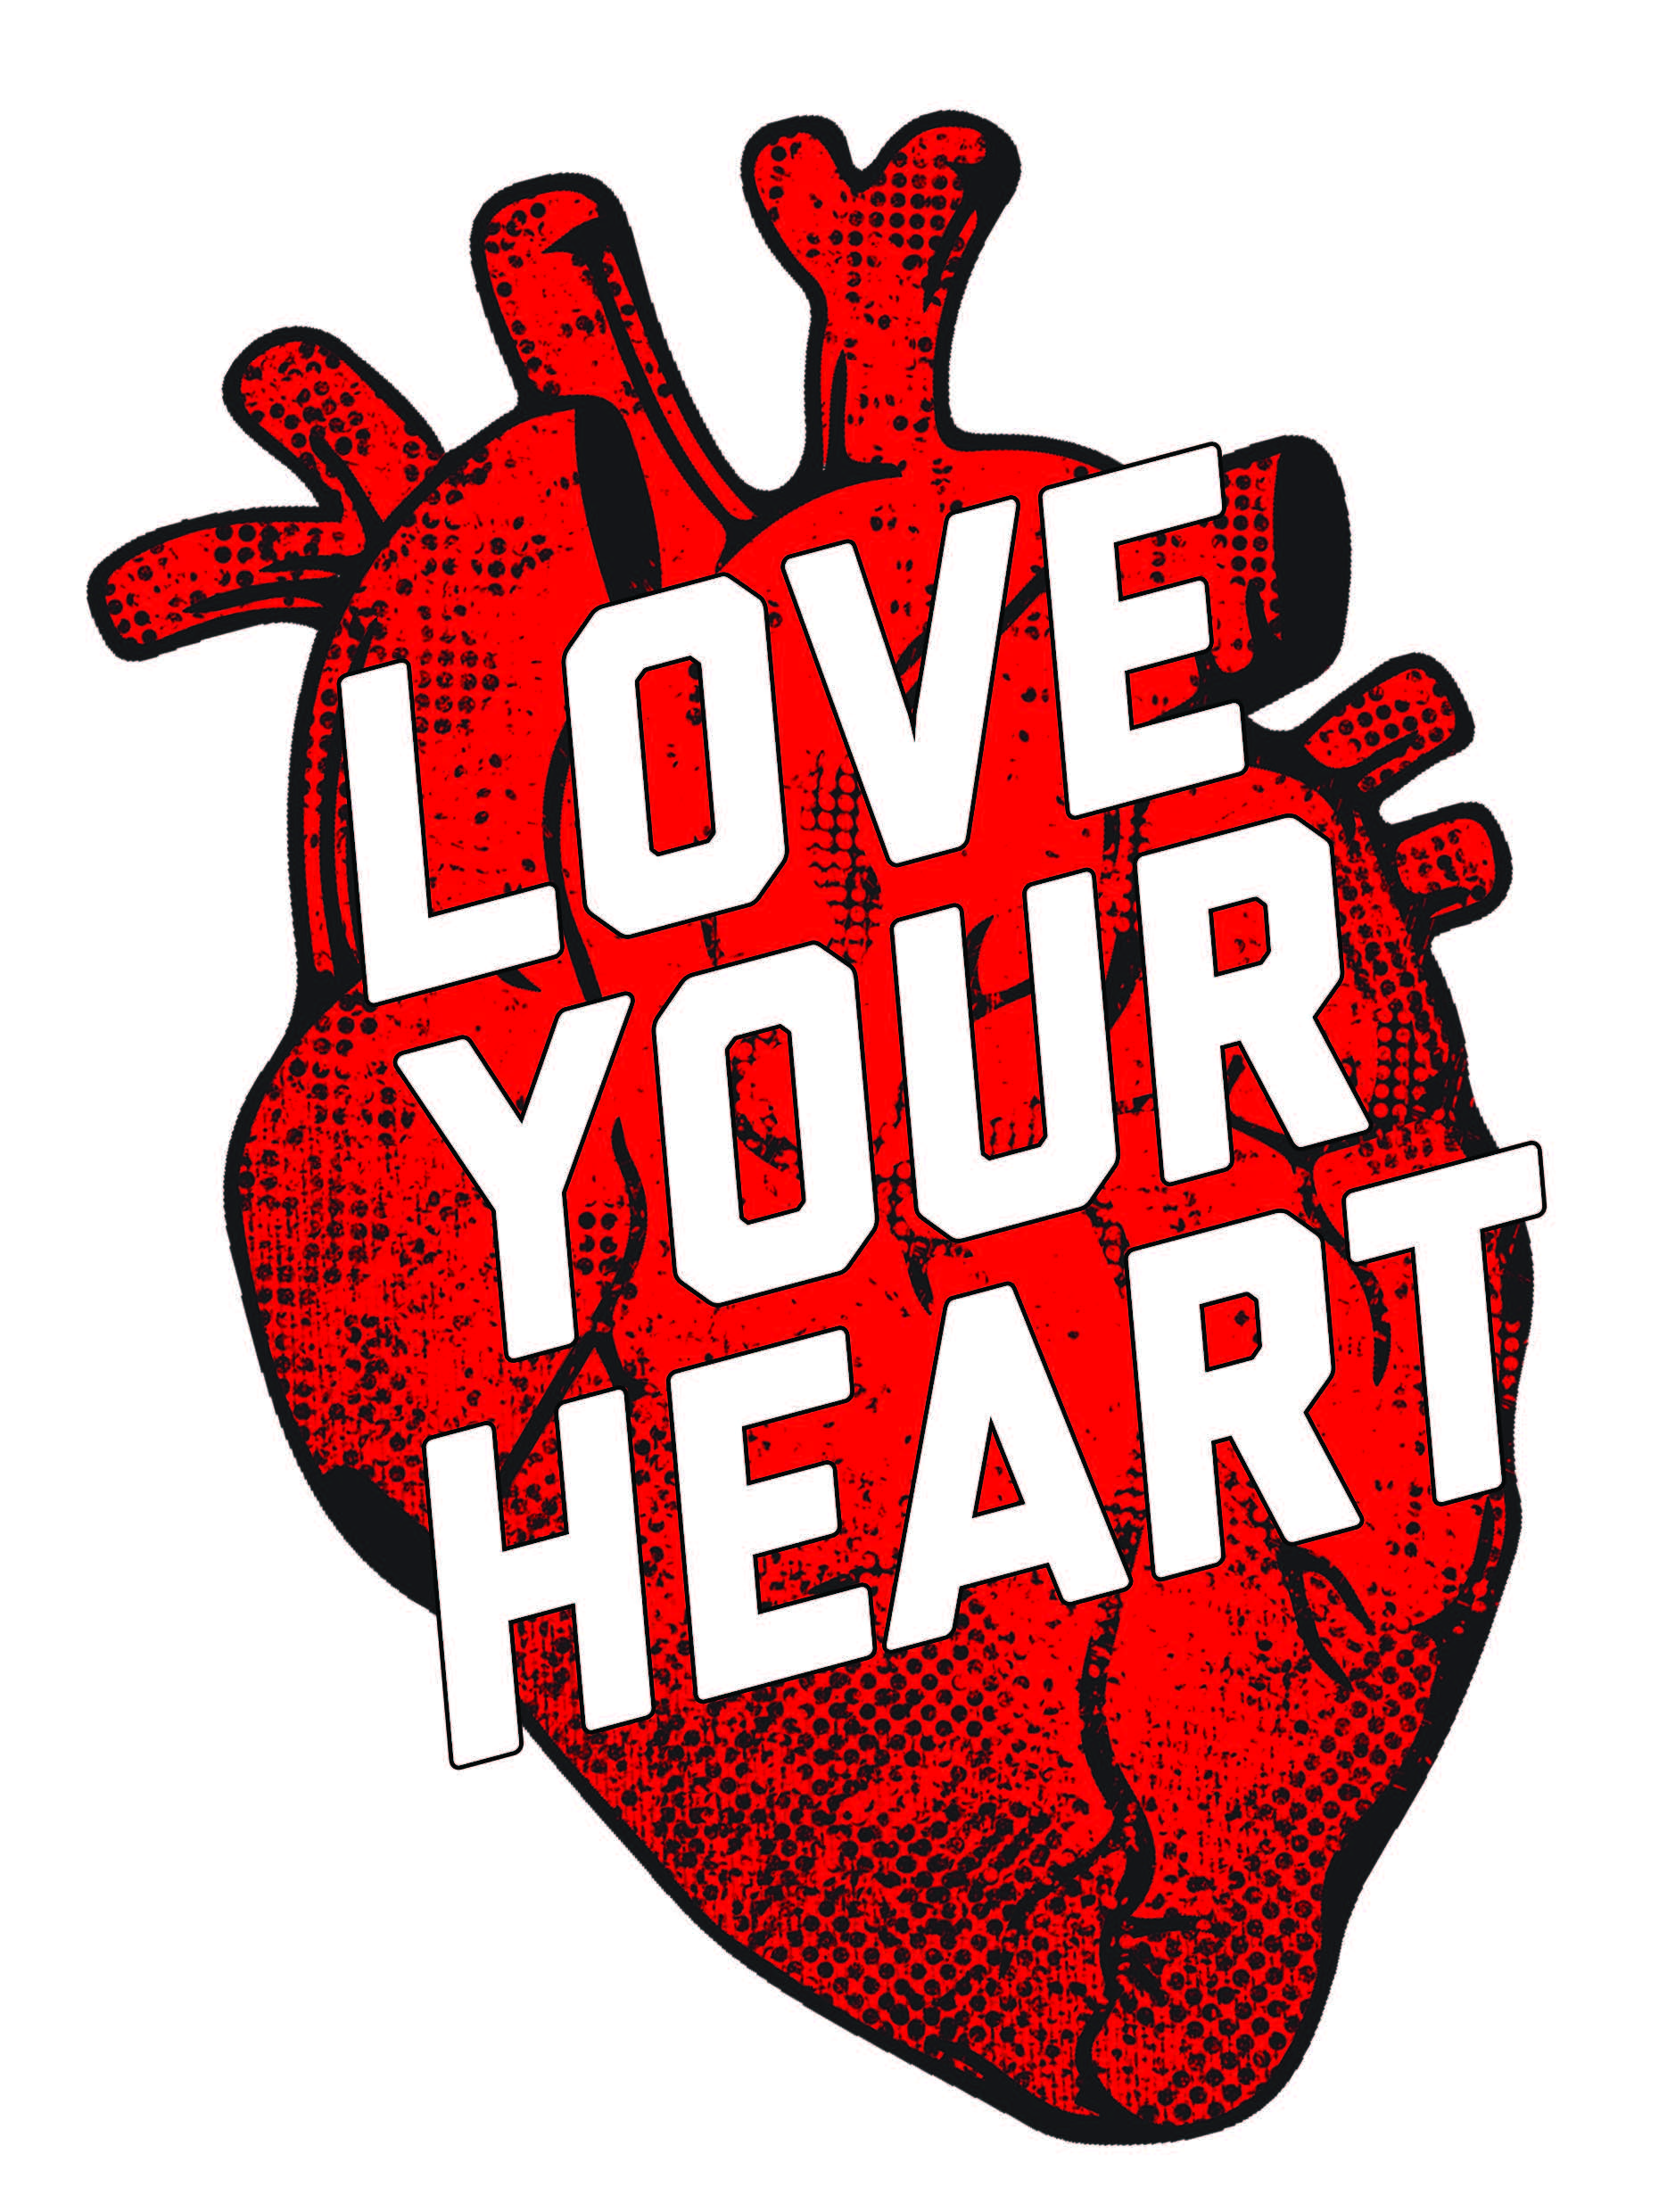 Love Your Heart events include a range of interactive, fun activities focused on heart health.